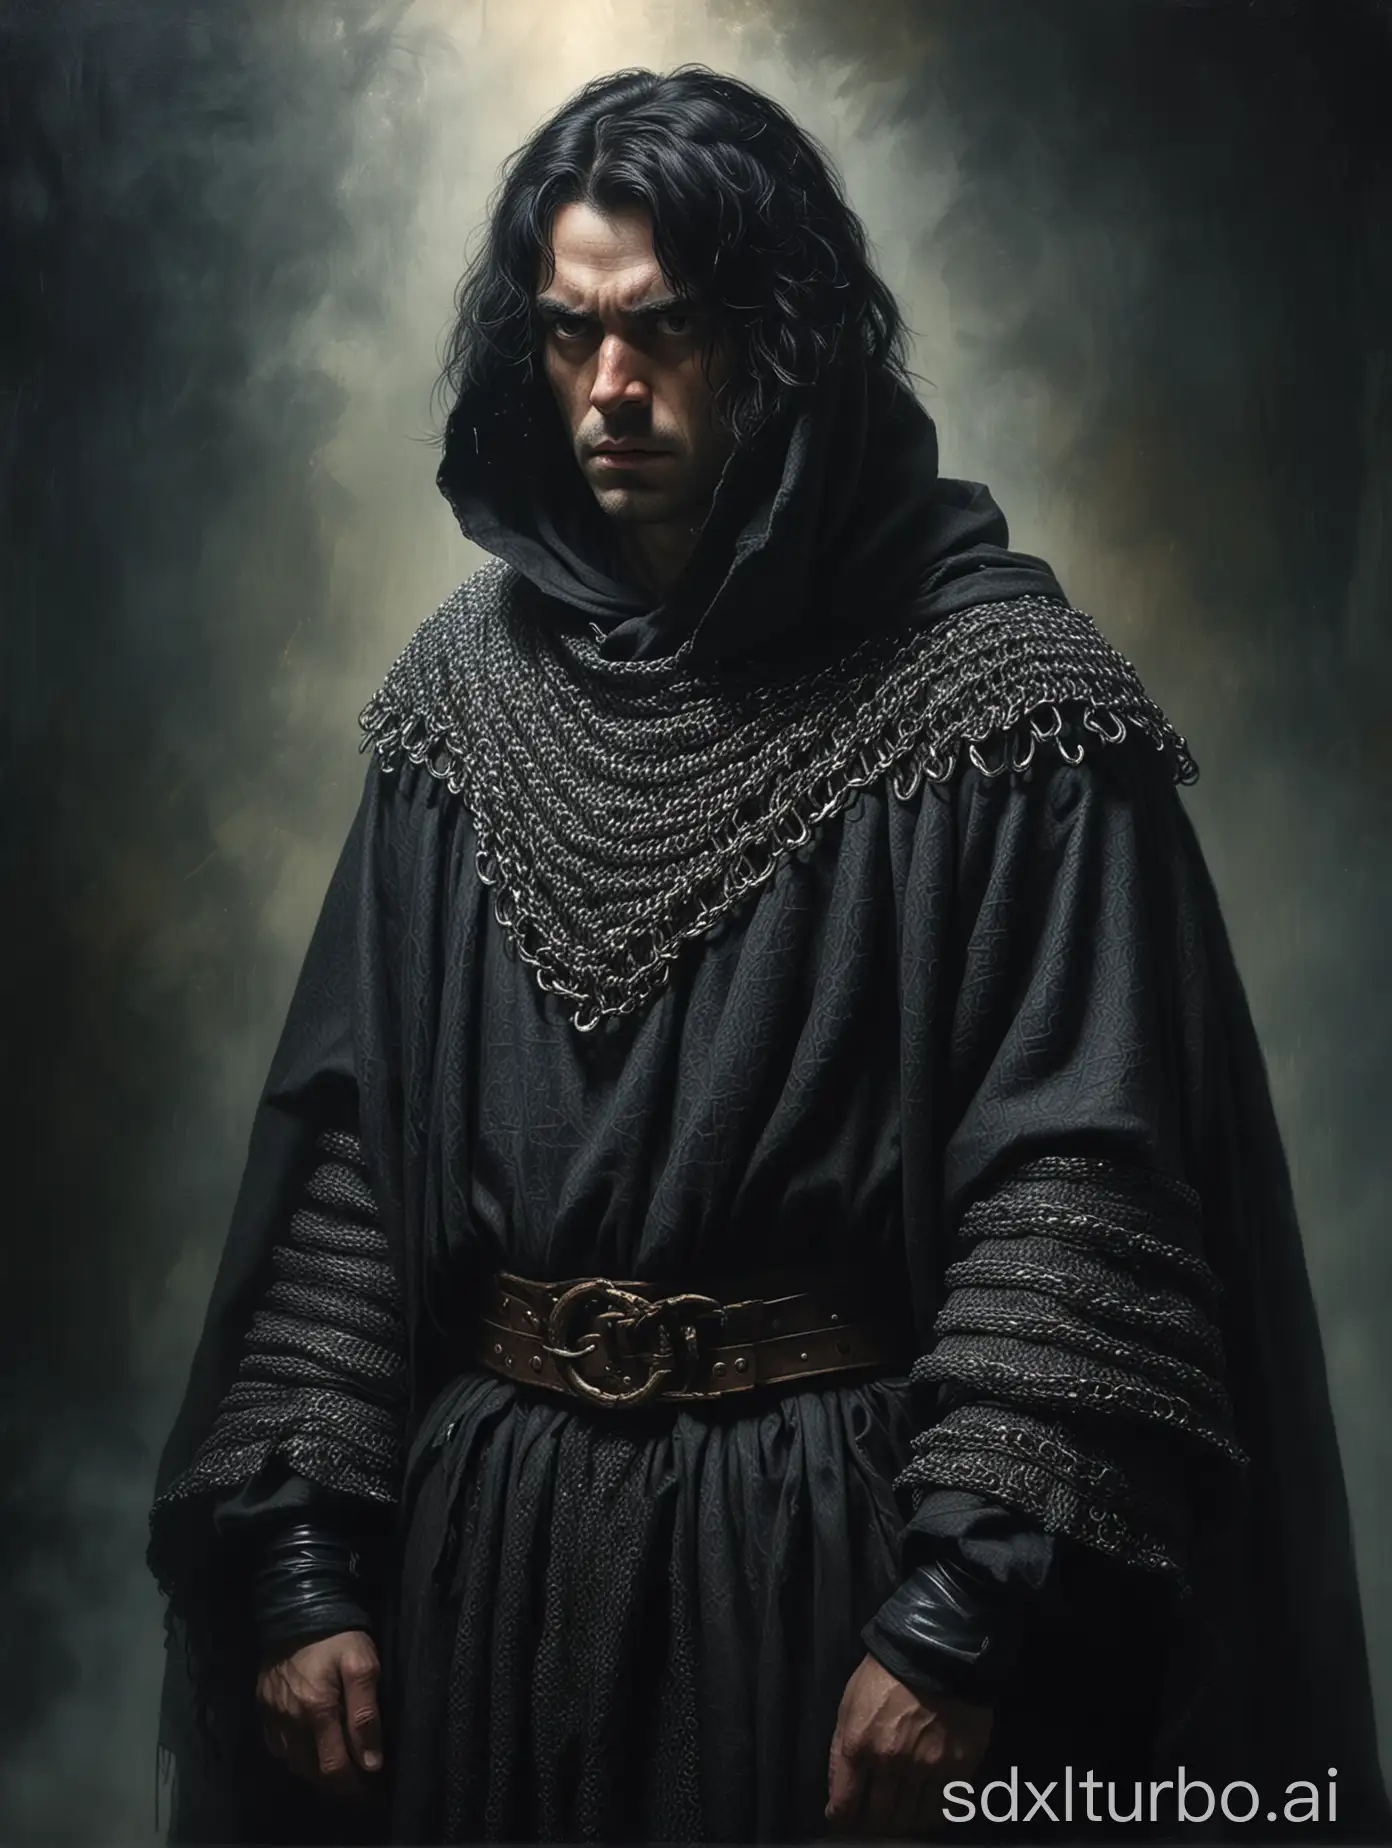 A black-haired man wearing chainmail armor under a wool cloak, mysterious, sinister, foggy, dark, epic, dramatic lighting, oil painting, in the style of Francisco Goya.